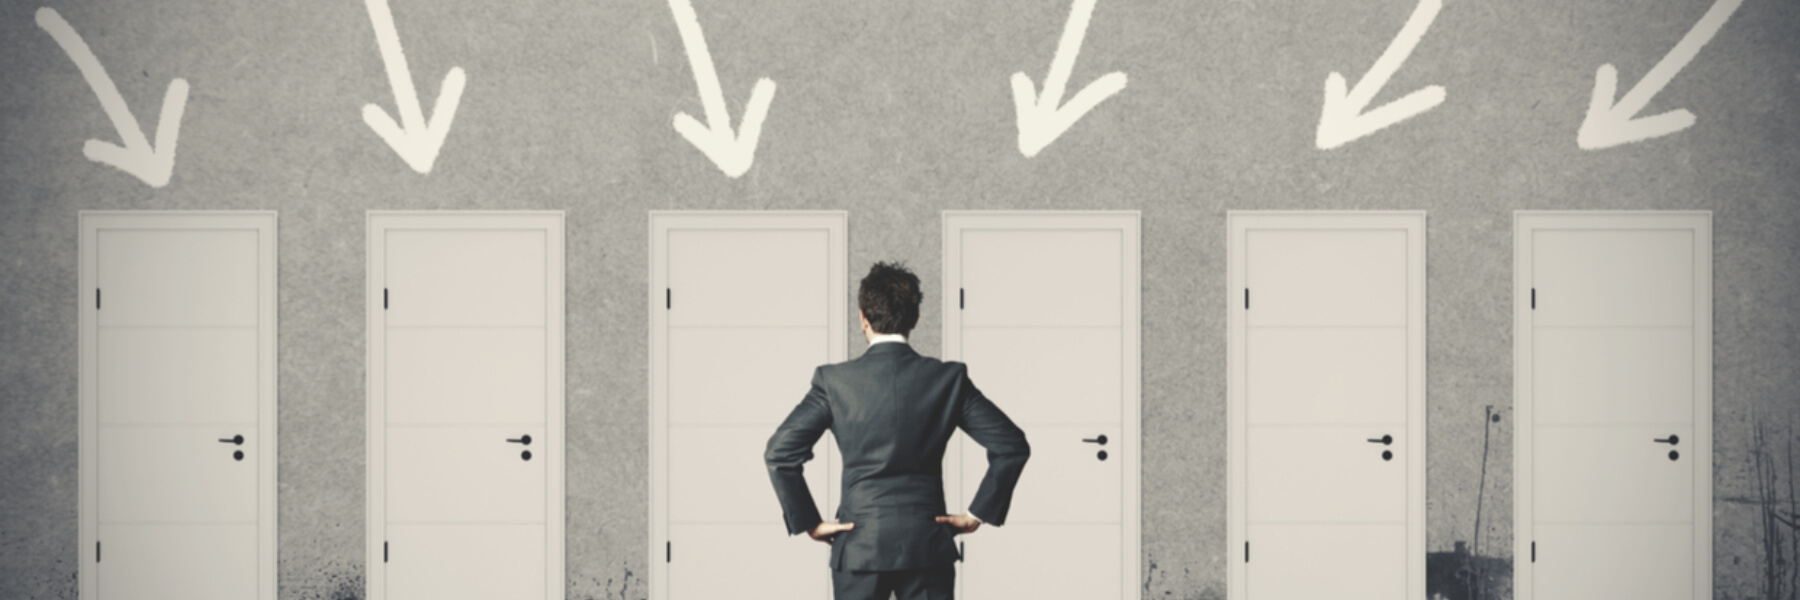 businessman standing in front of multiple doors, options for multifunction printers concept